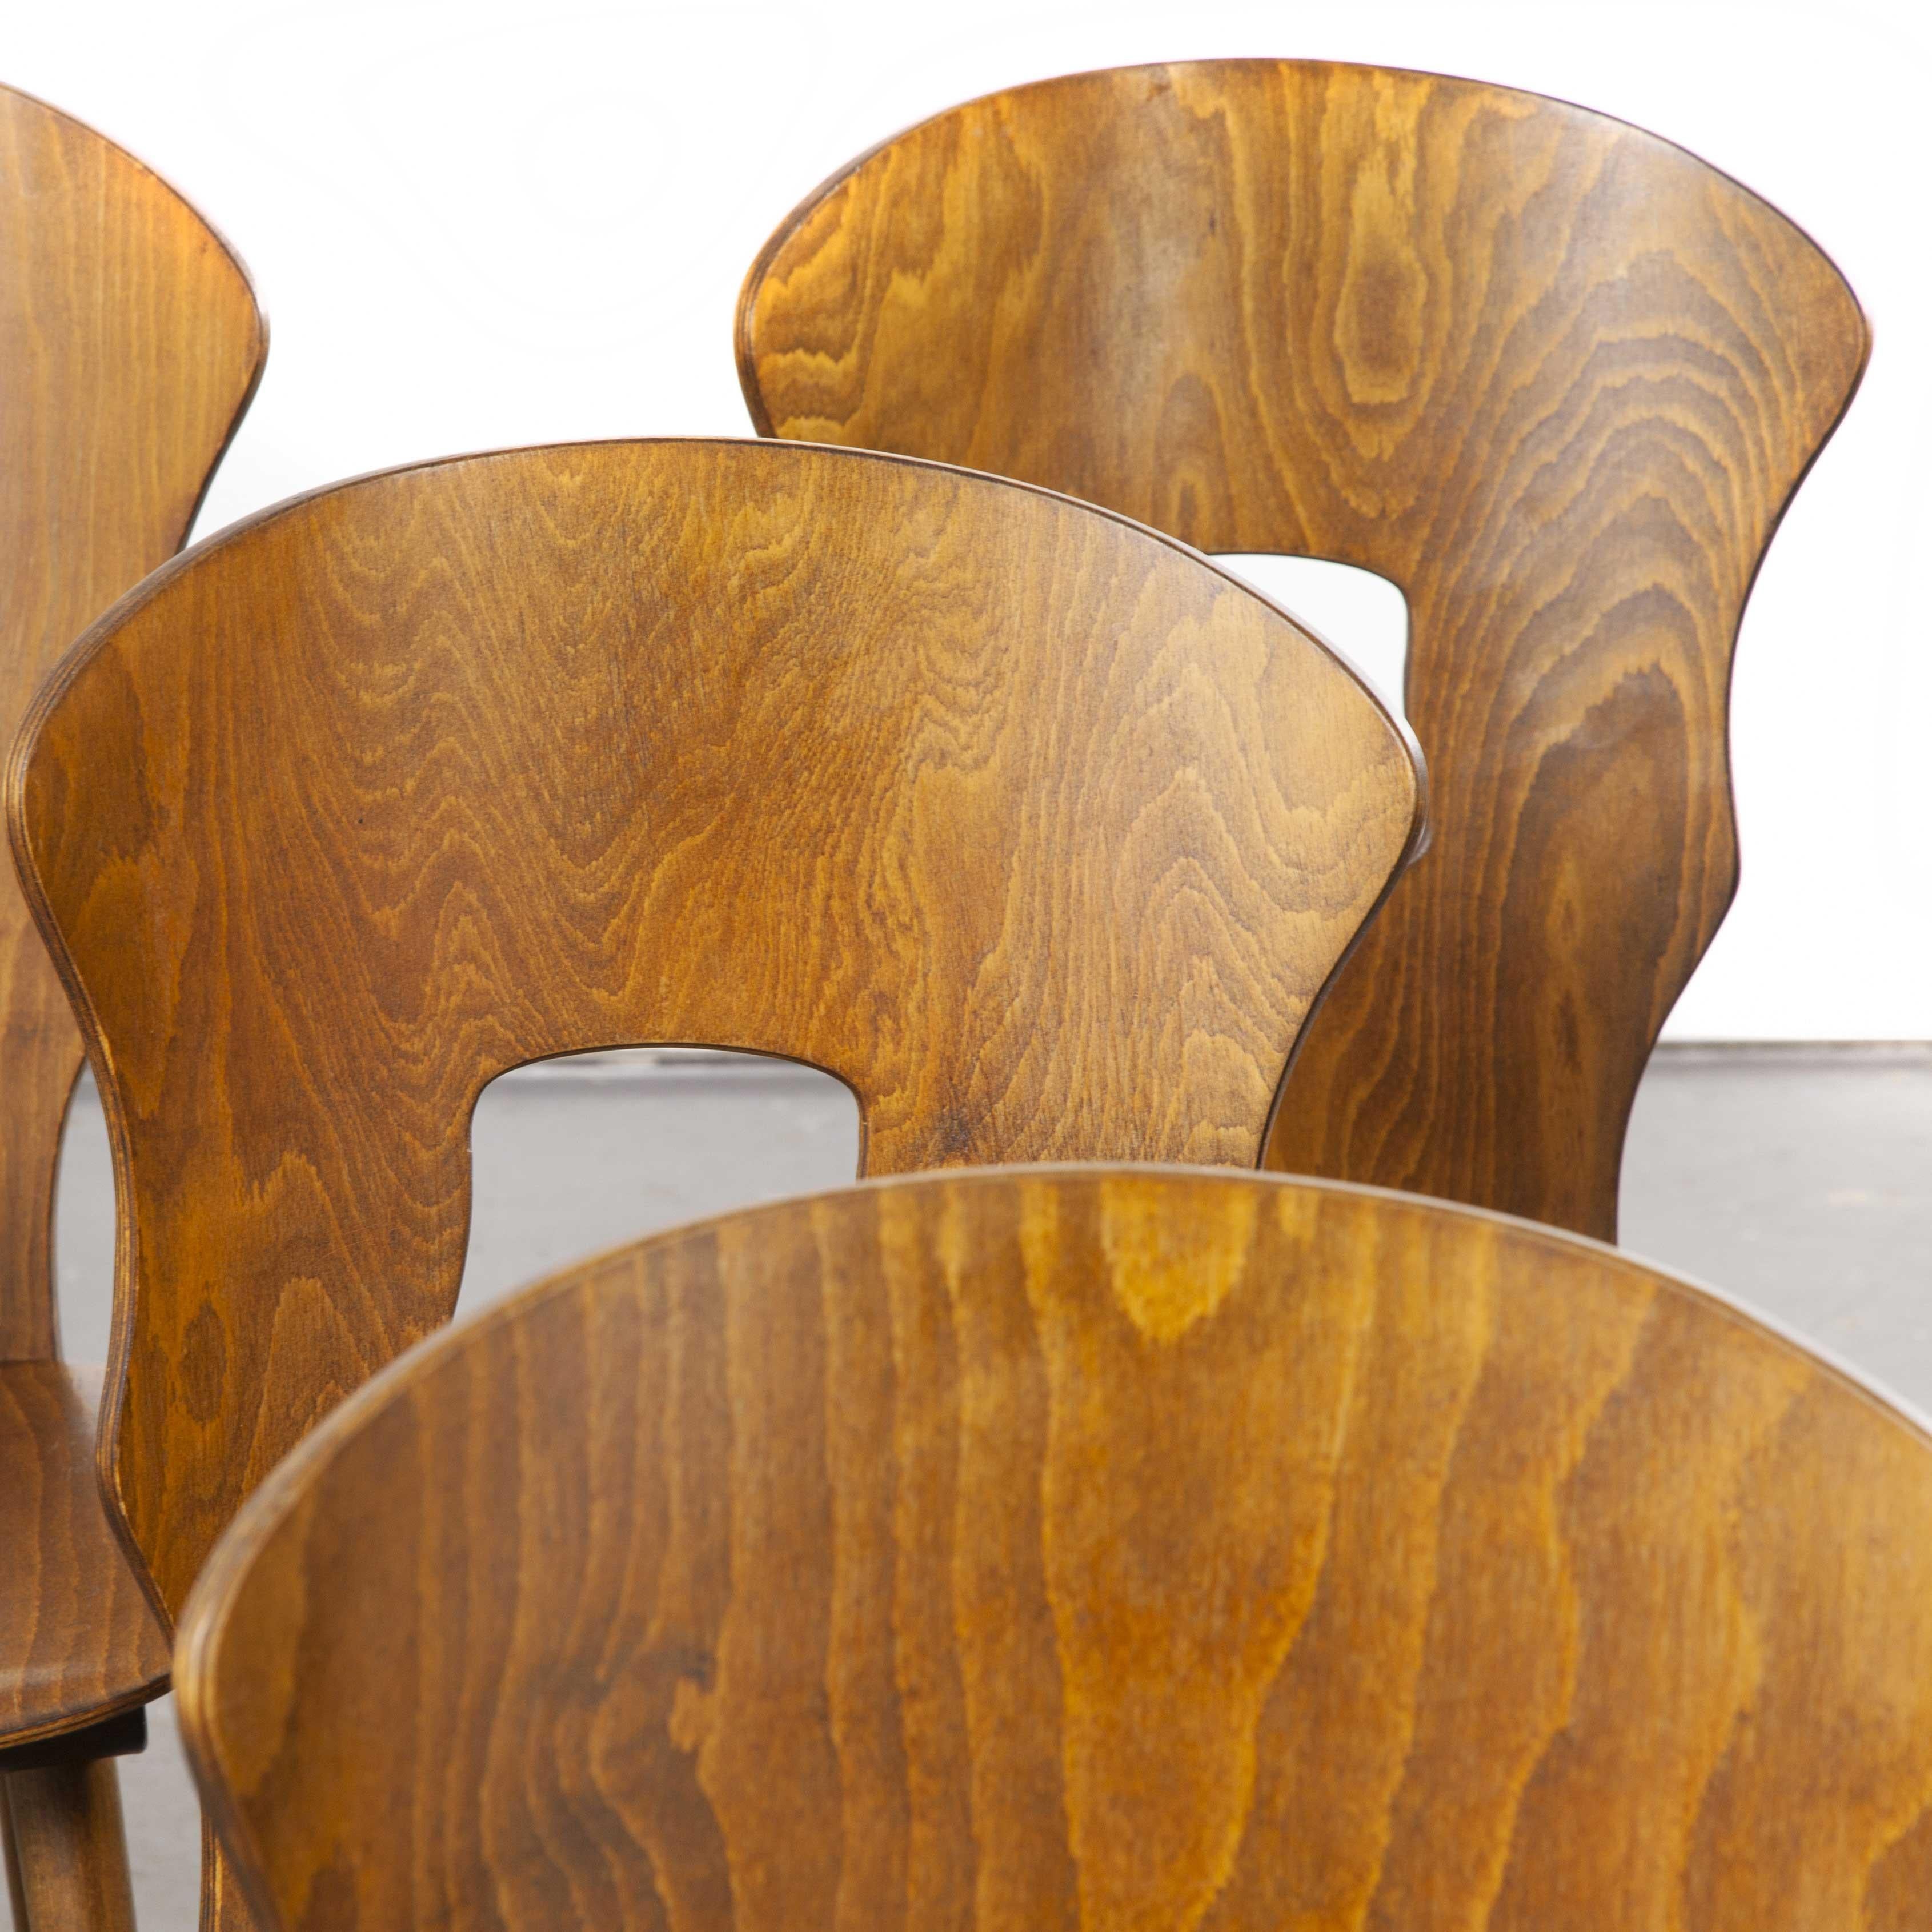 1950s French Baumann bentwood Gentiane dining chair - set of six. Classic beech bistro chair made in France by the maker Joamin Baumann. Baumann is a slightly off the radar French producer just starting to gain traction in the market. Baumann was